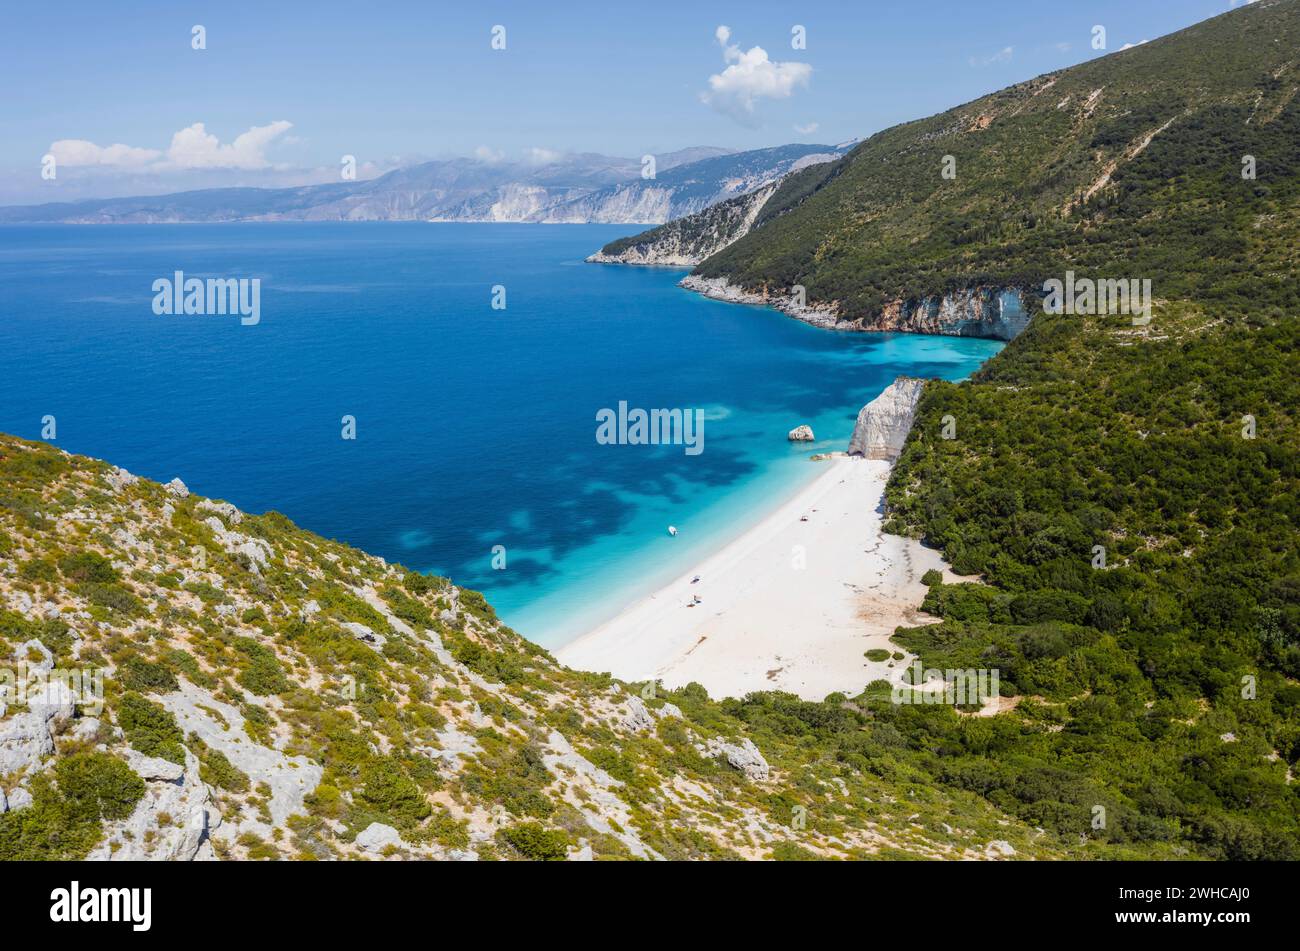 Stunning view of Fteri beach with white sailboat in hidden bay, Kefalonia, Greece. Surrounded by mediterranean vegetation. trekking path. Amazing seascape. Stock Photo